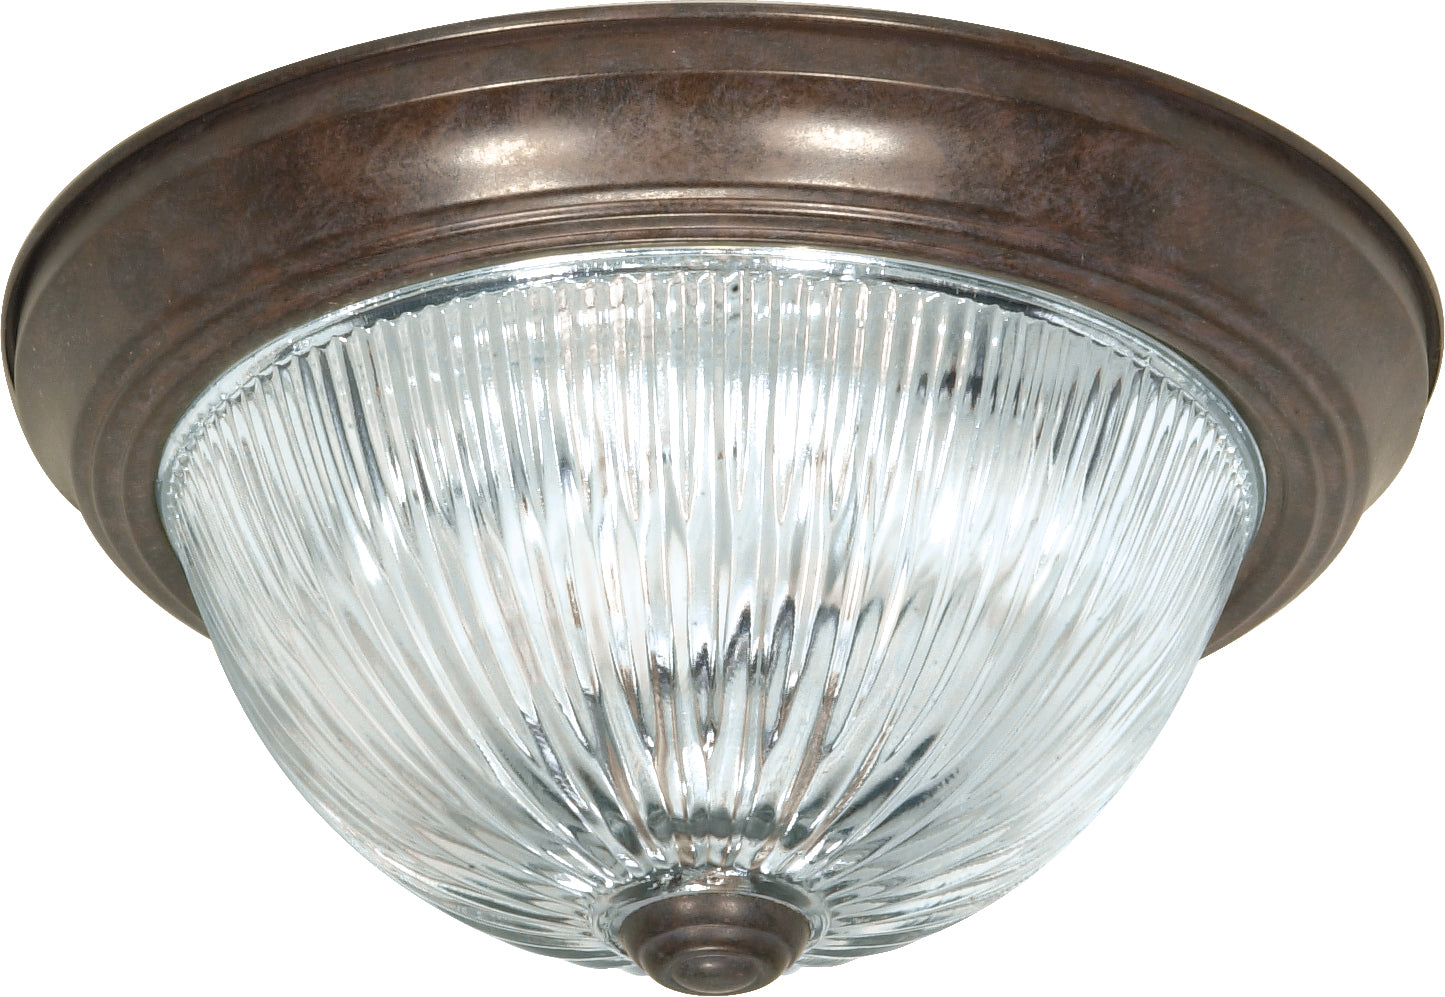 Nuvo 2-Light 11" Ceiling Light w/ Clear Ribbed Glass in Old Bronze Finish